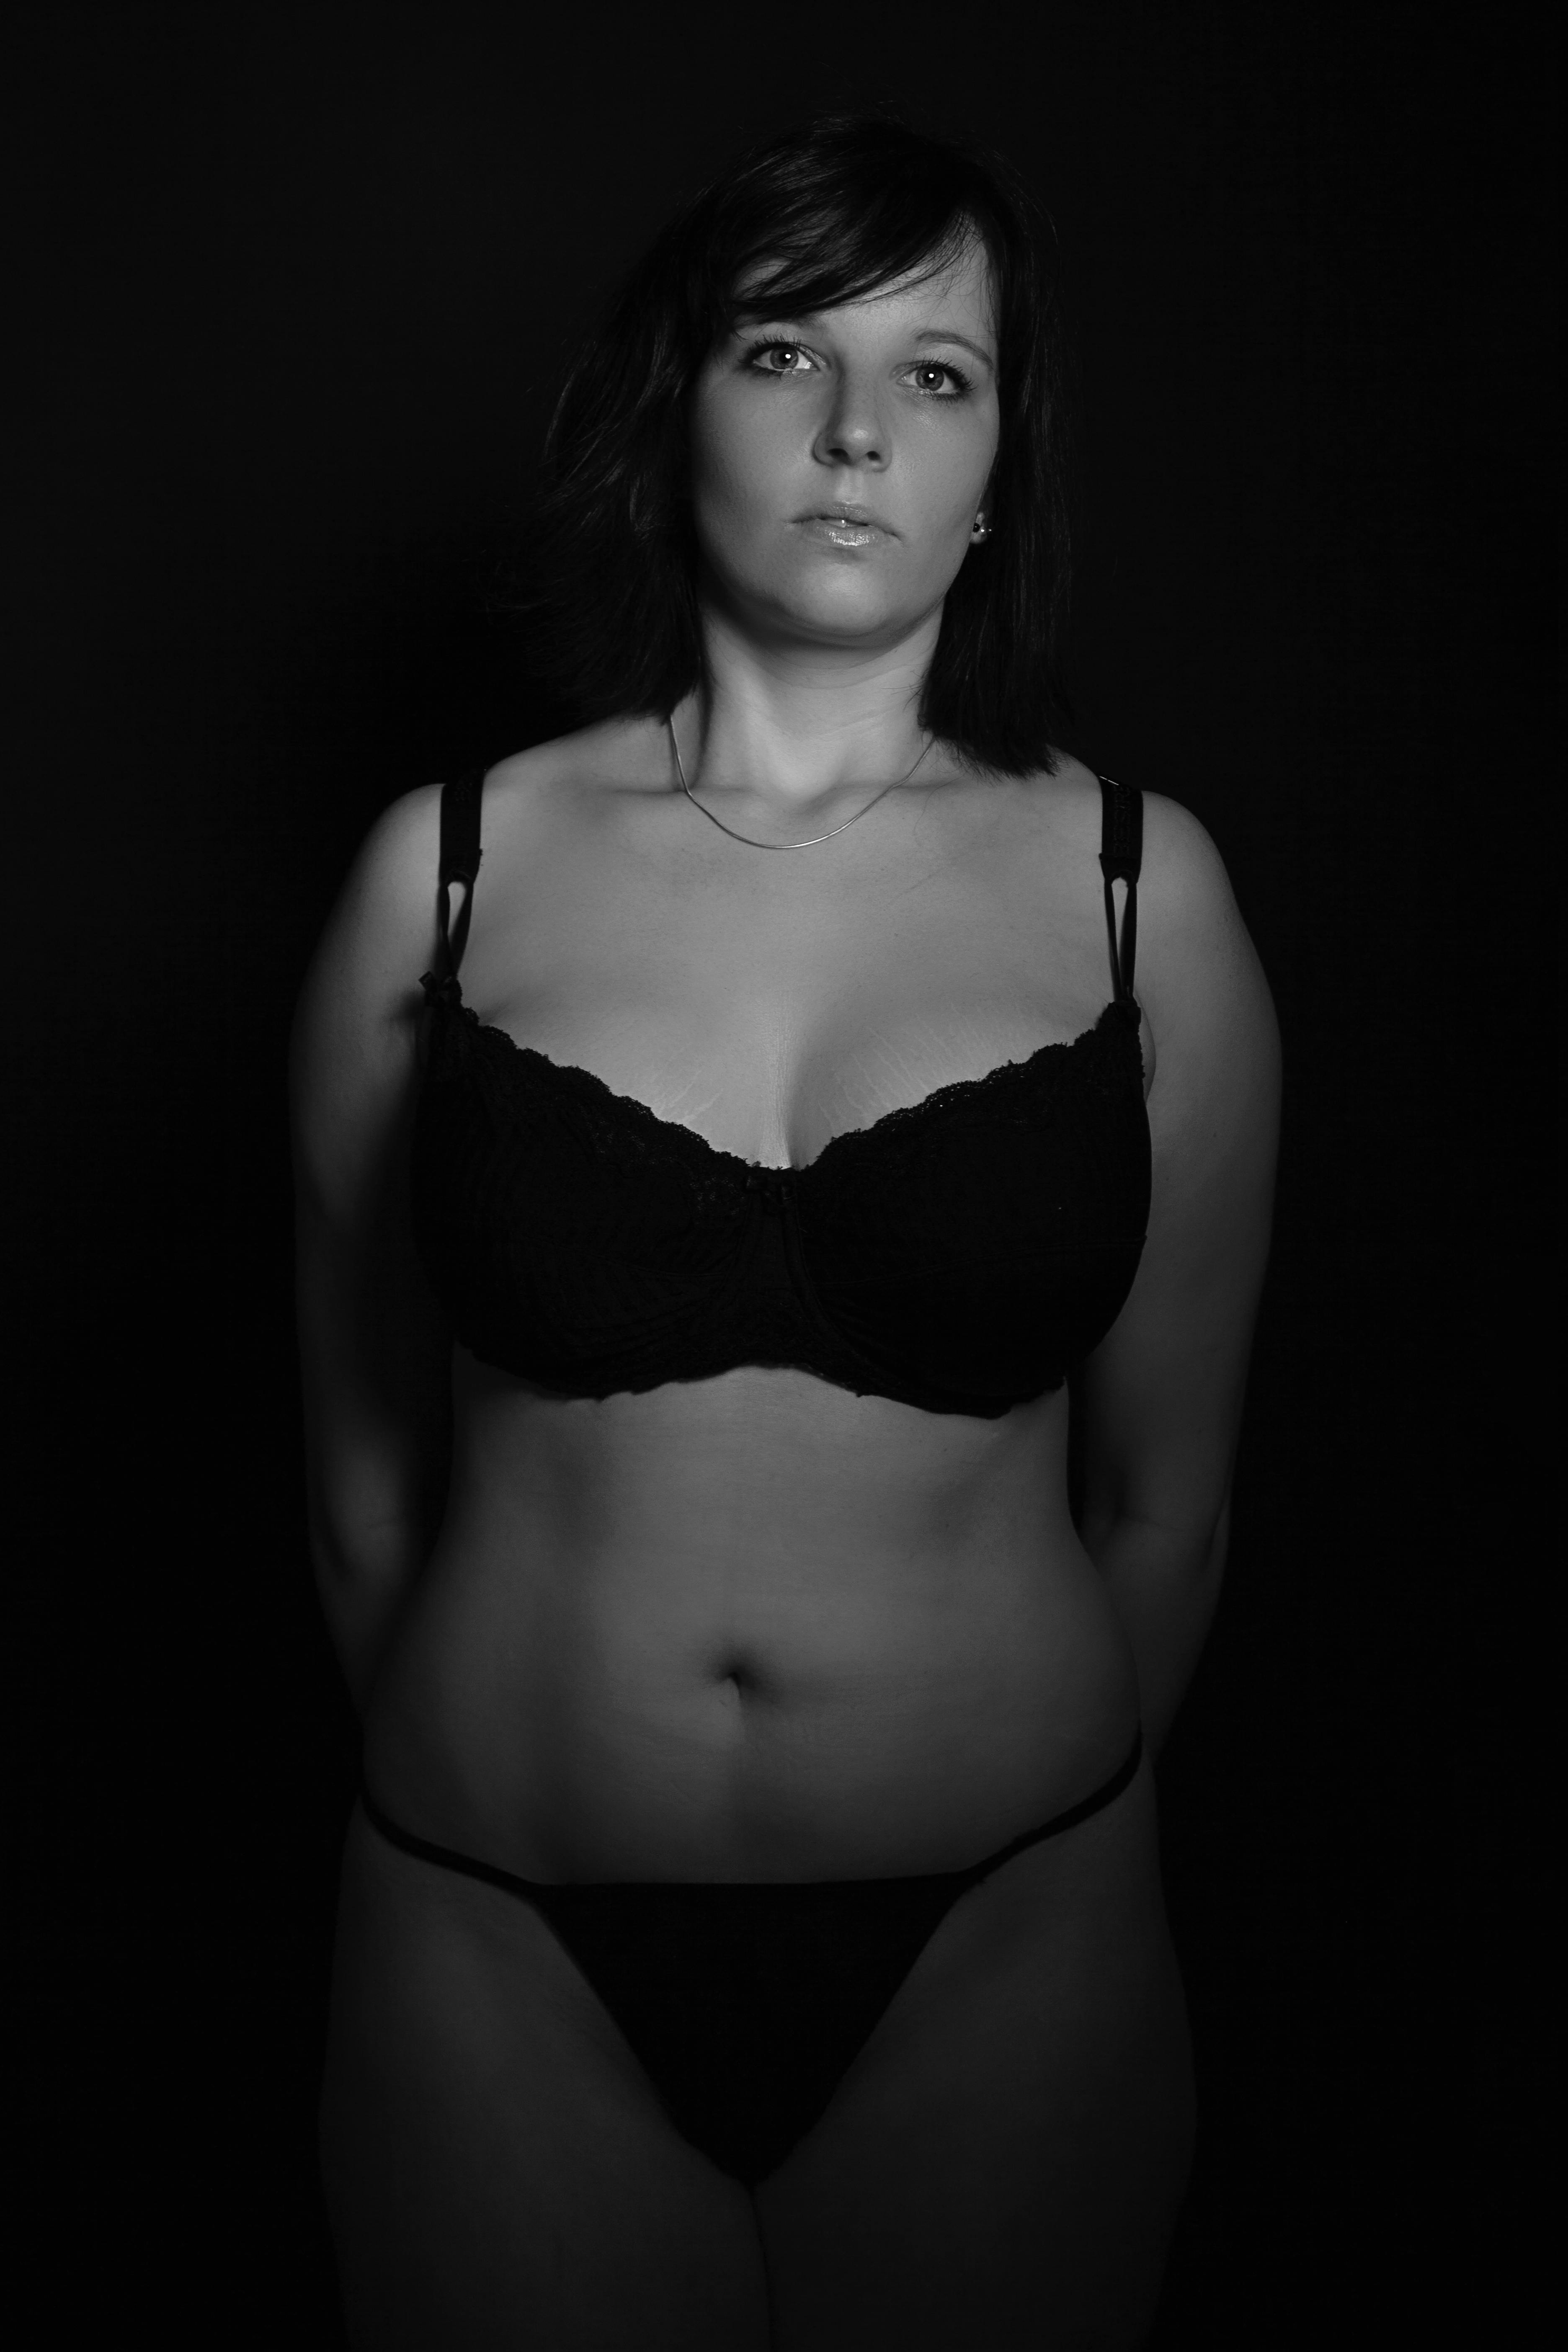 File:Girl in bra and panties - black and white.jpg - Wikimedia Commons